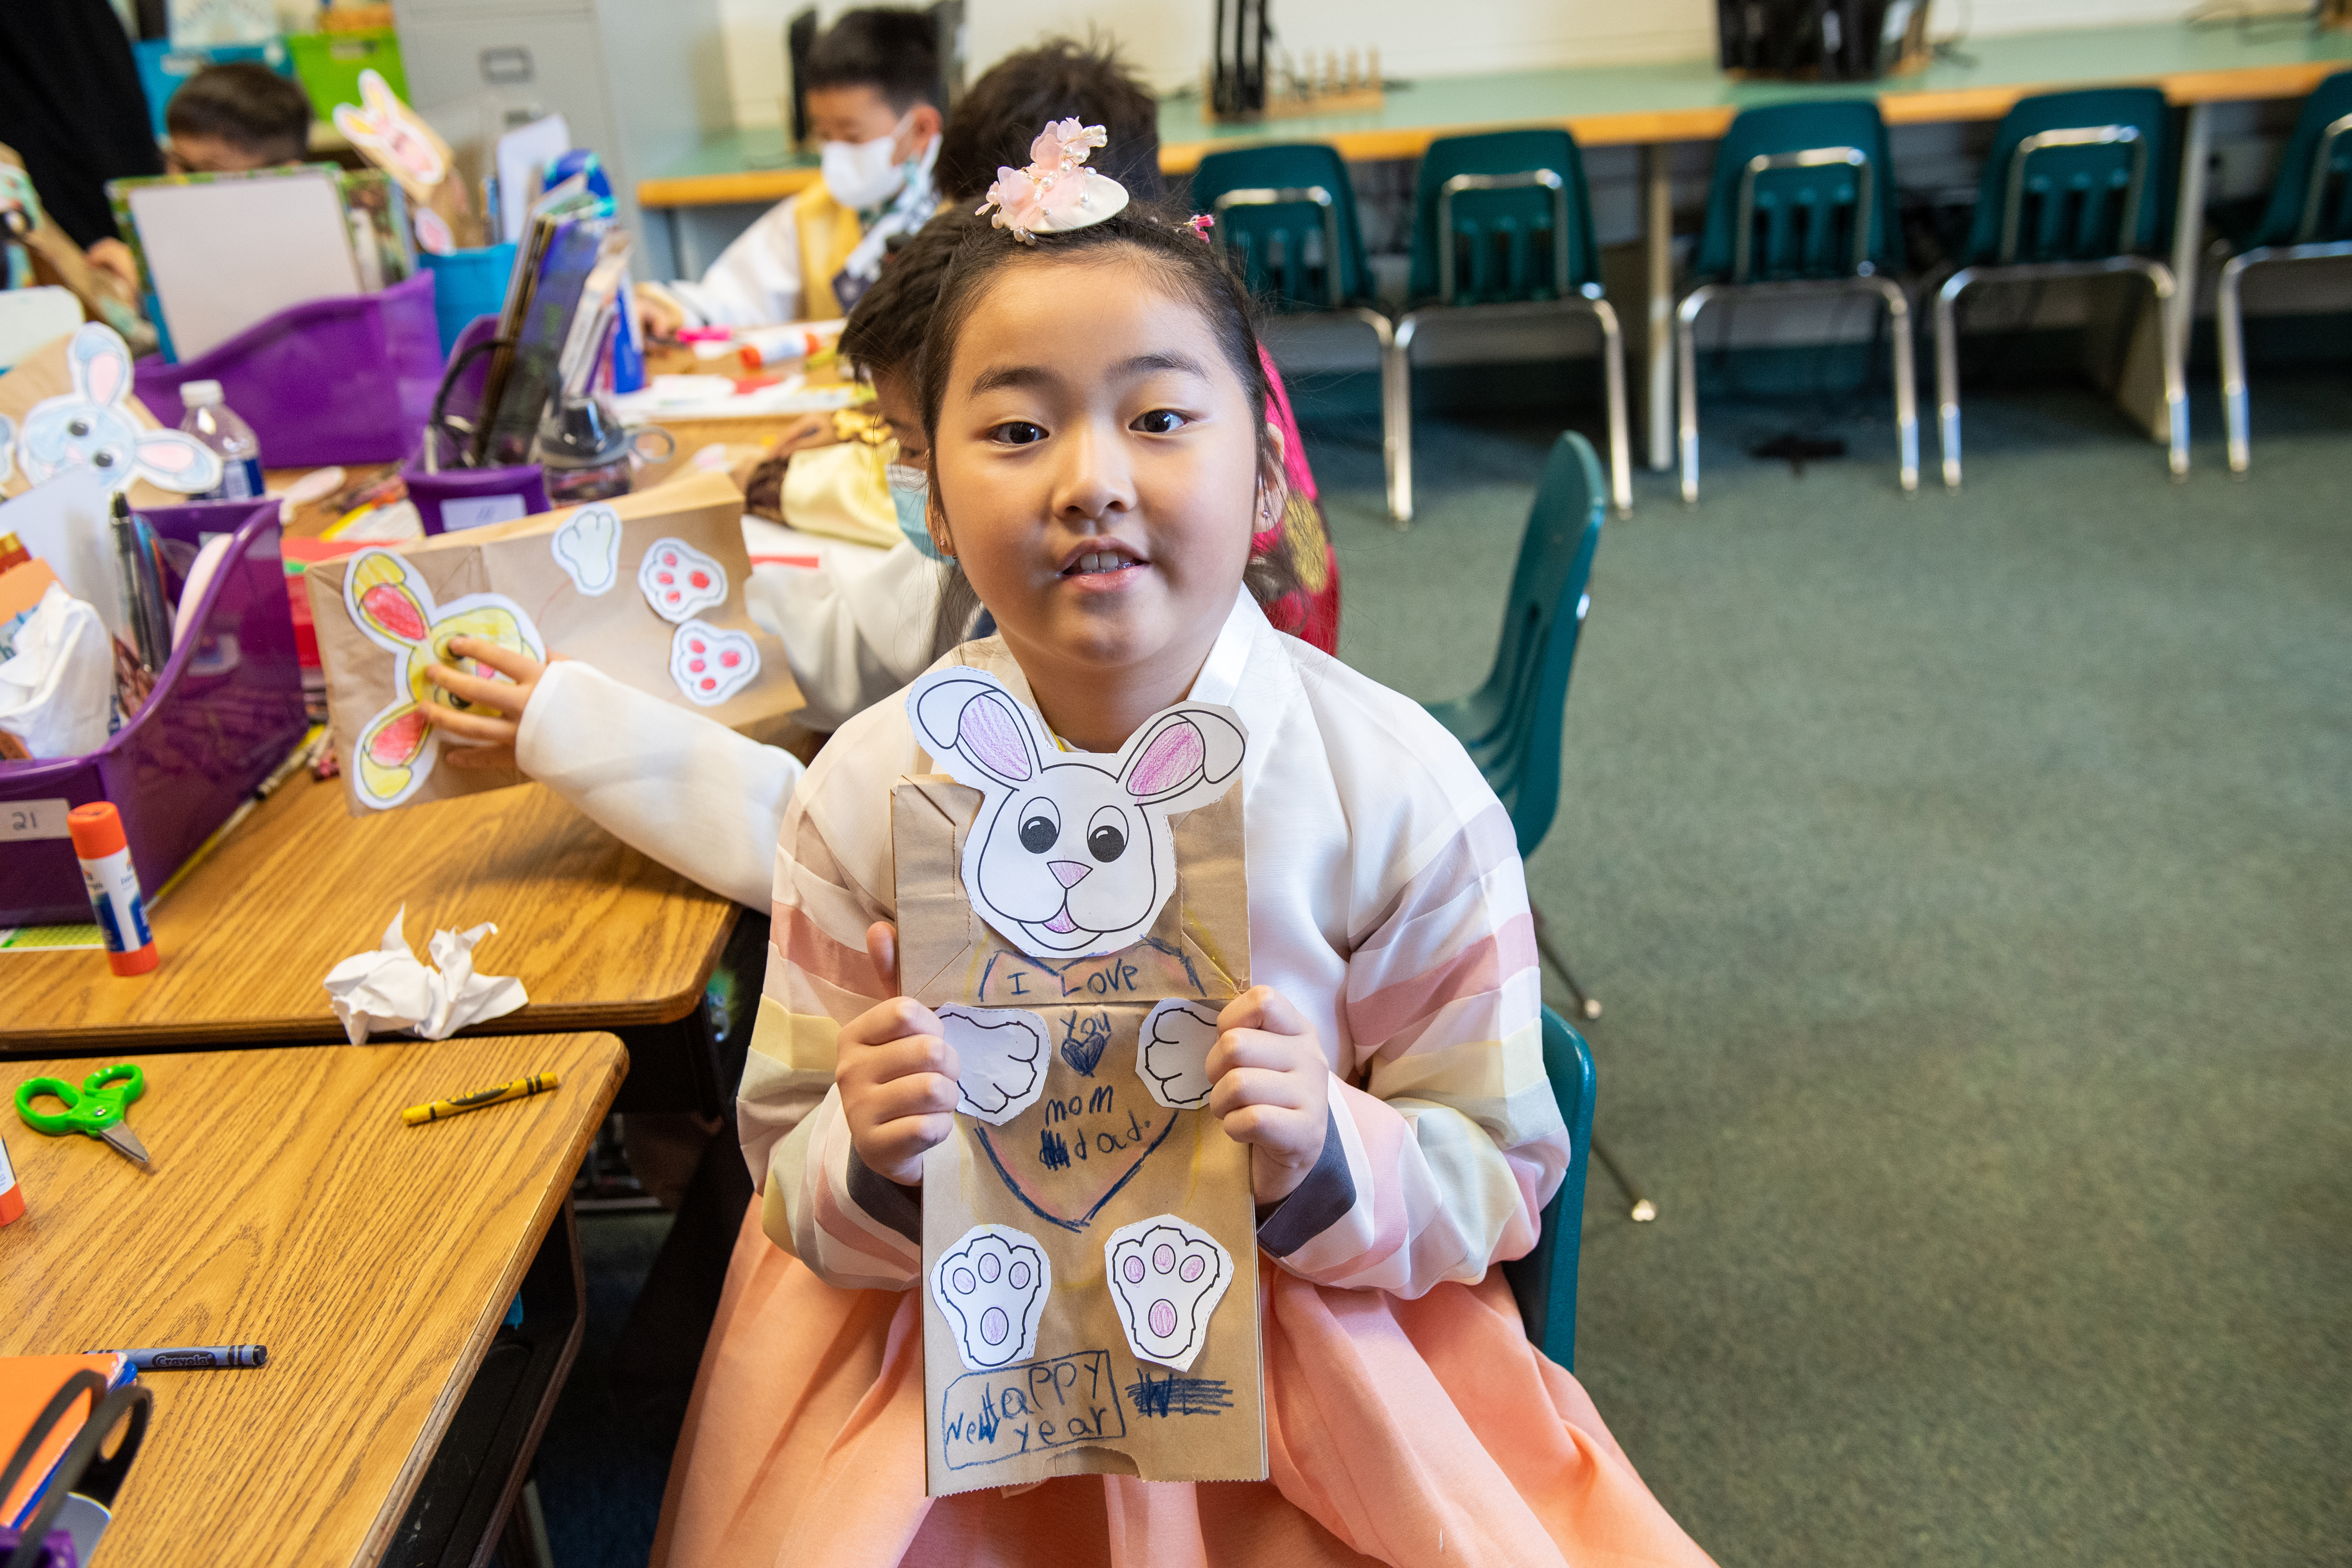 A Powell Elementary kindergarten student displays a bunny puppet she made to honor the Year of the Rabbit.